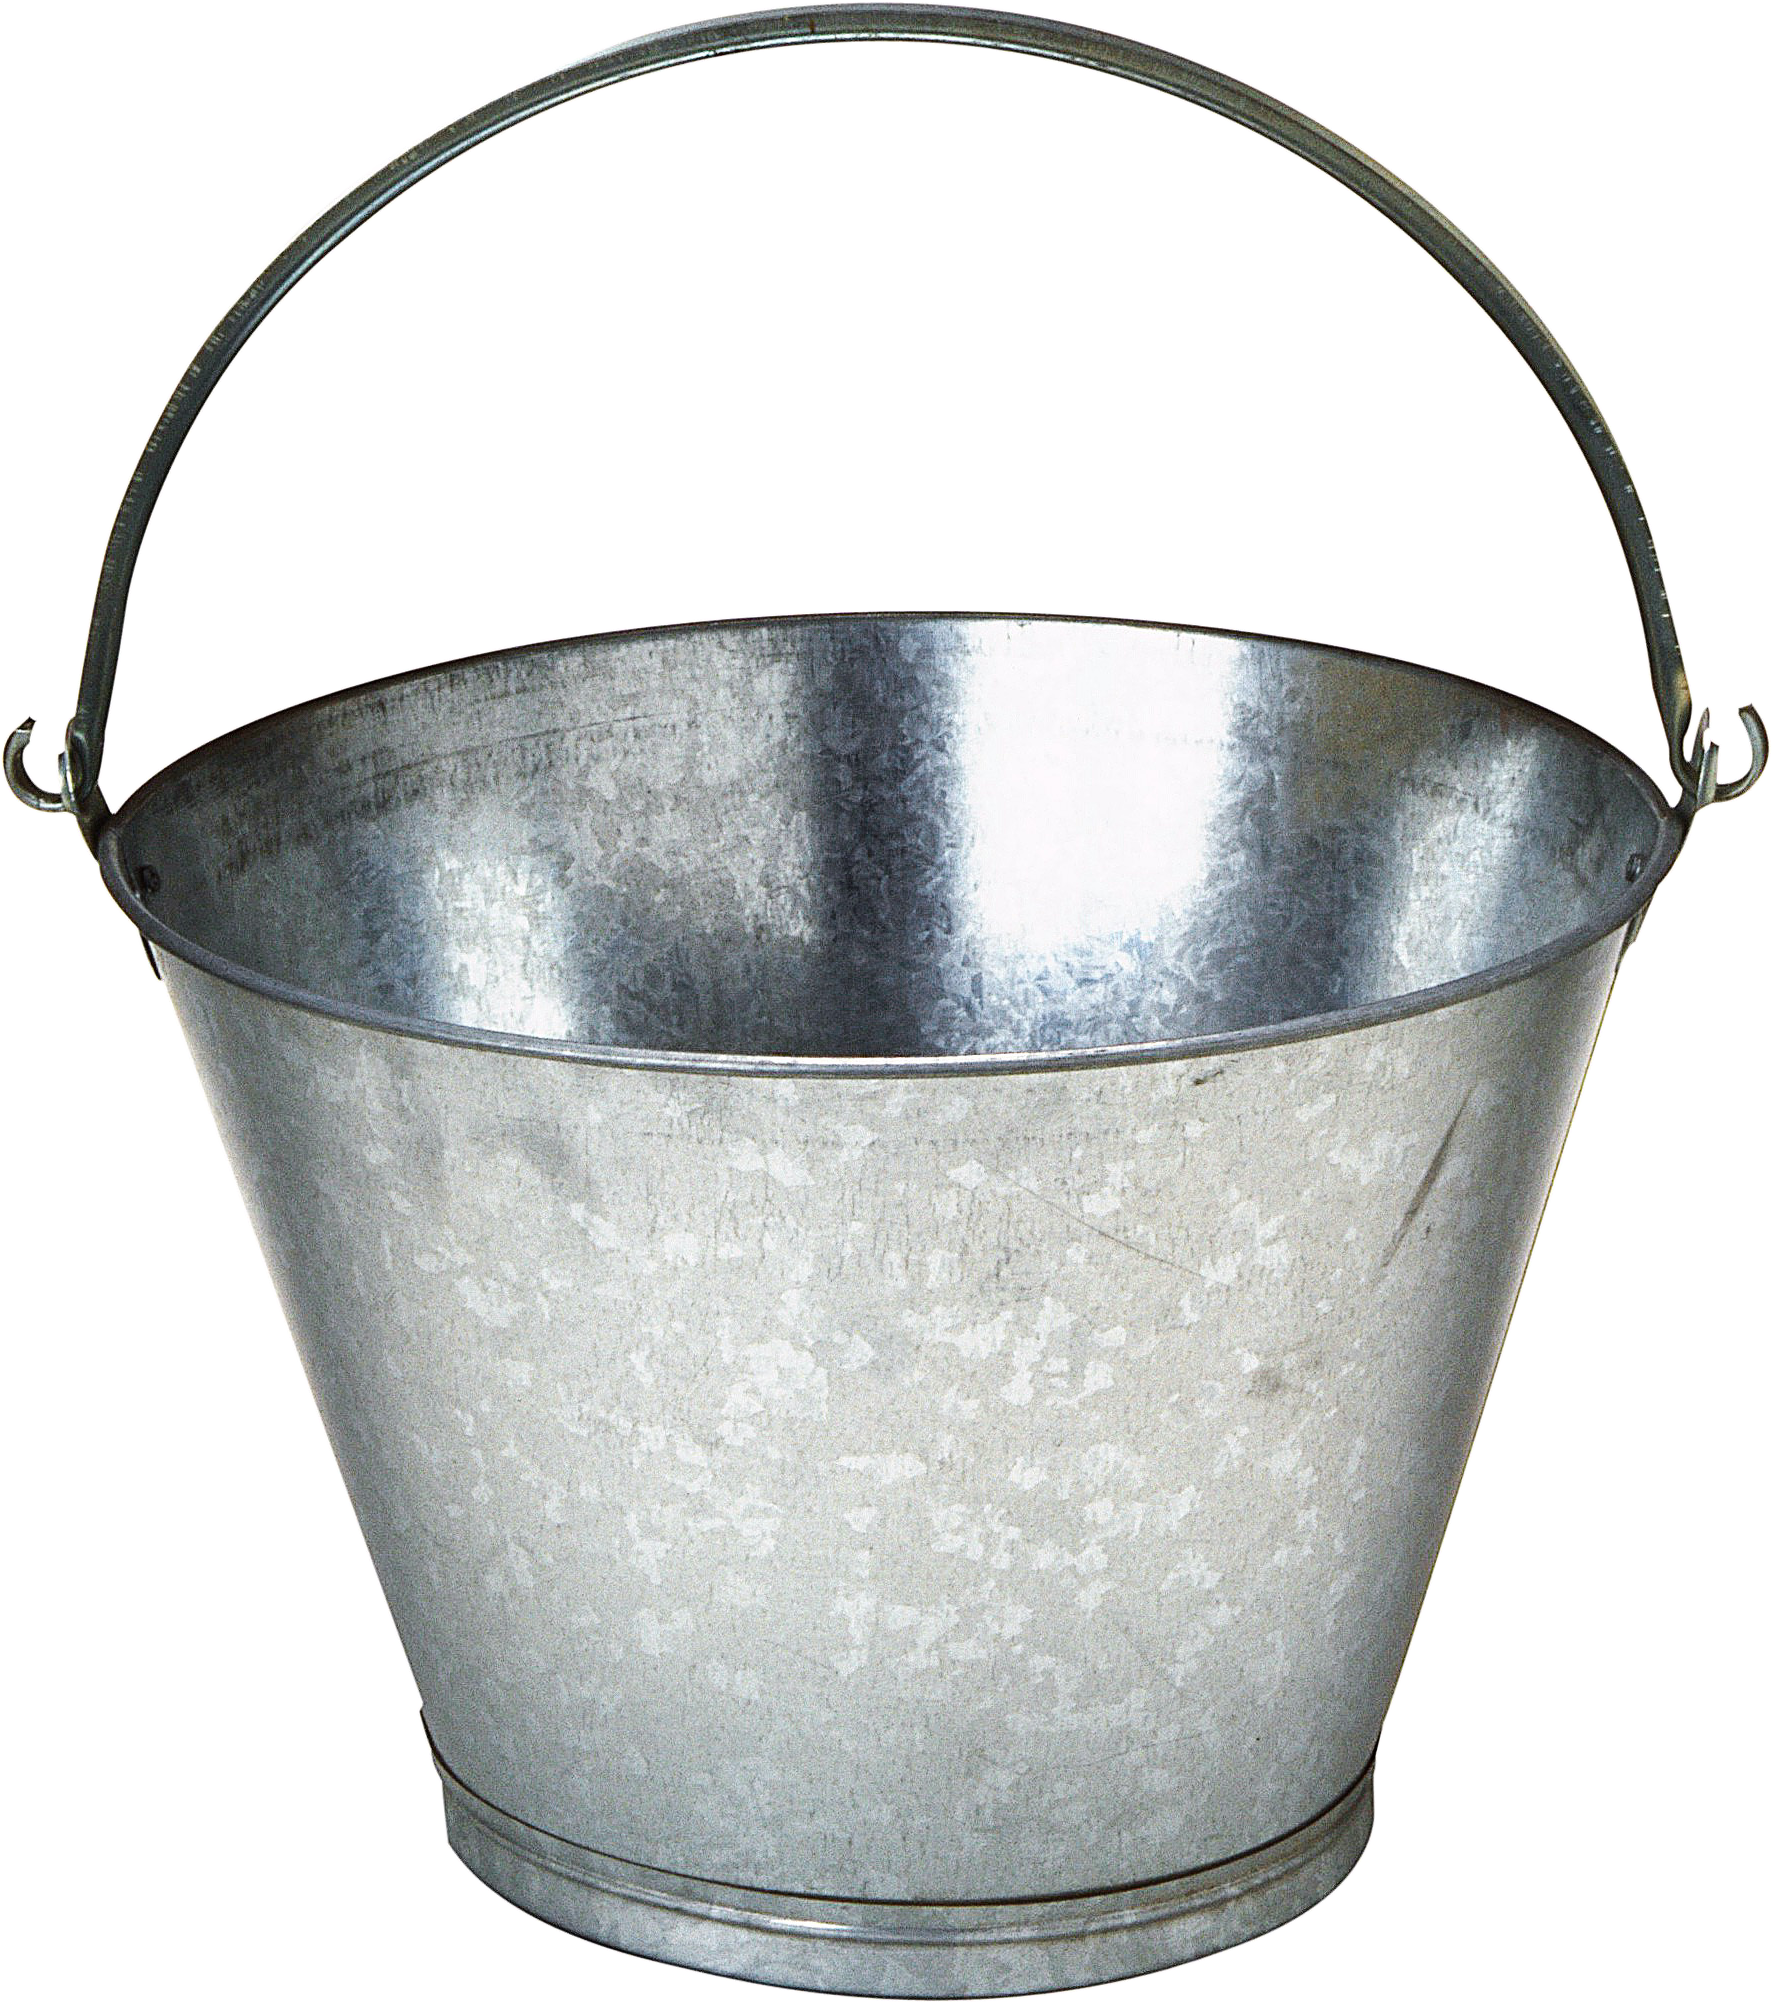 Bucket PNG images free download, bucket PNG.